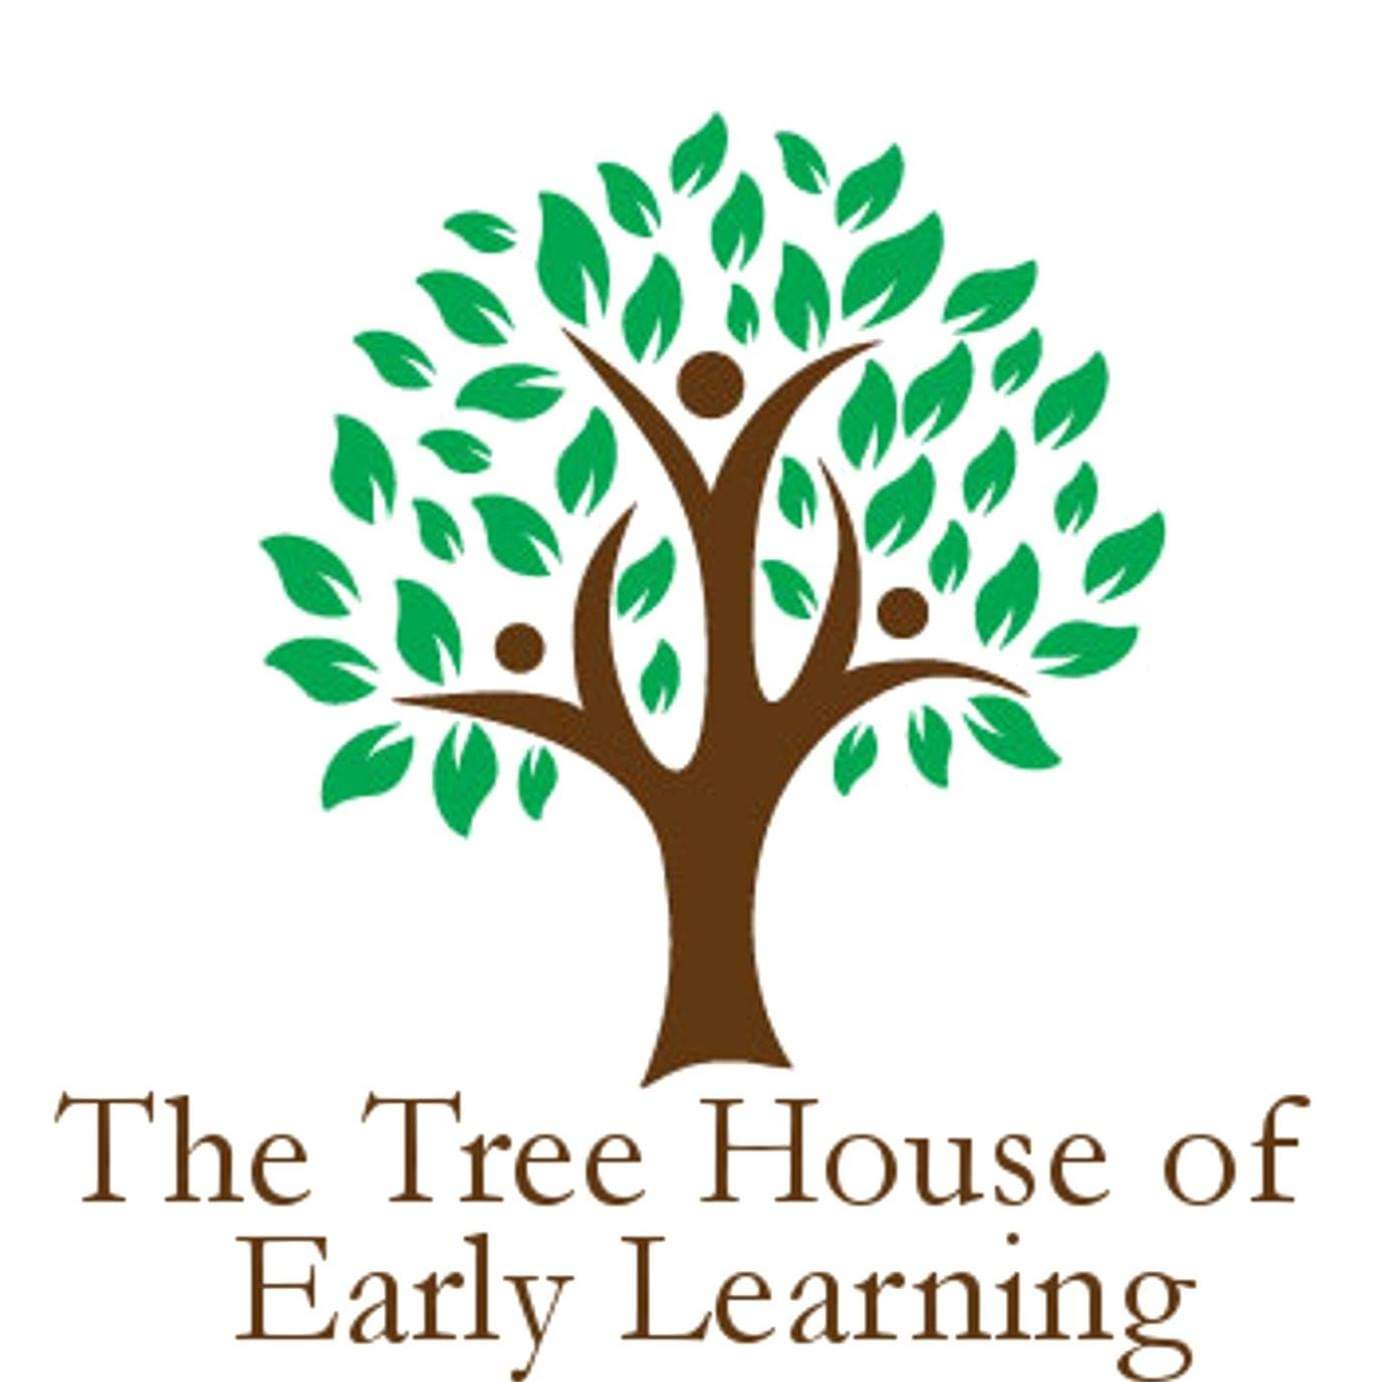 The Tree House of Early Learning